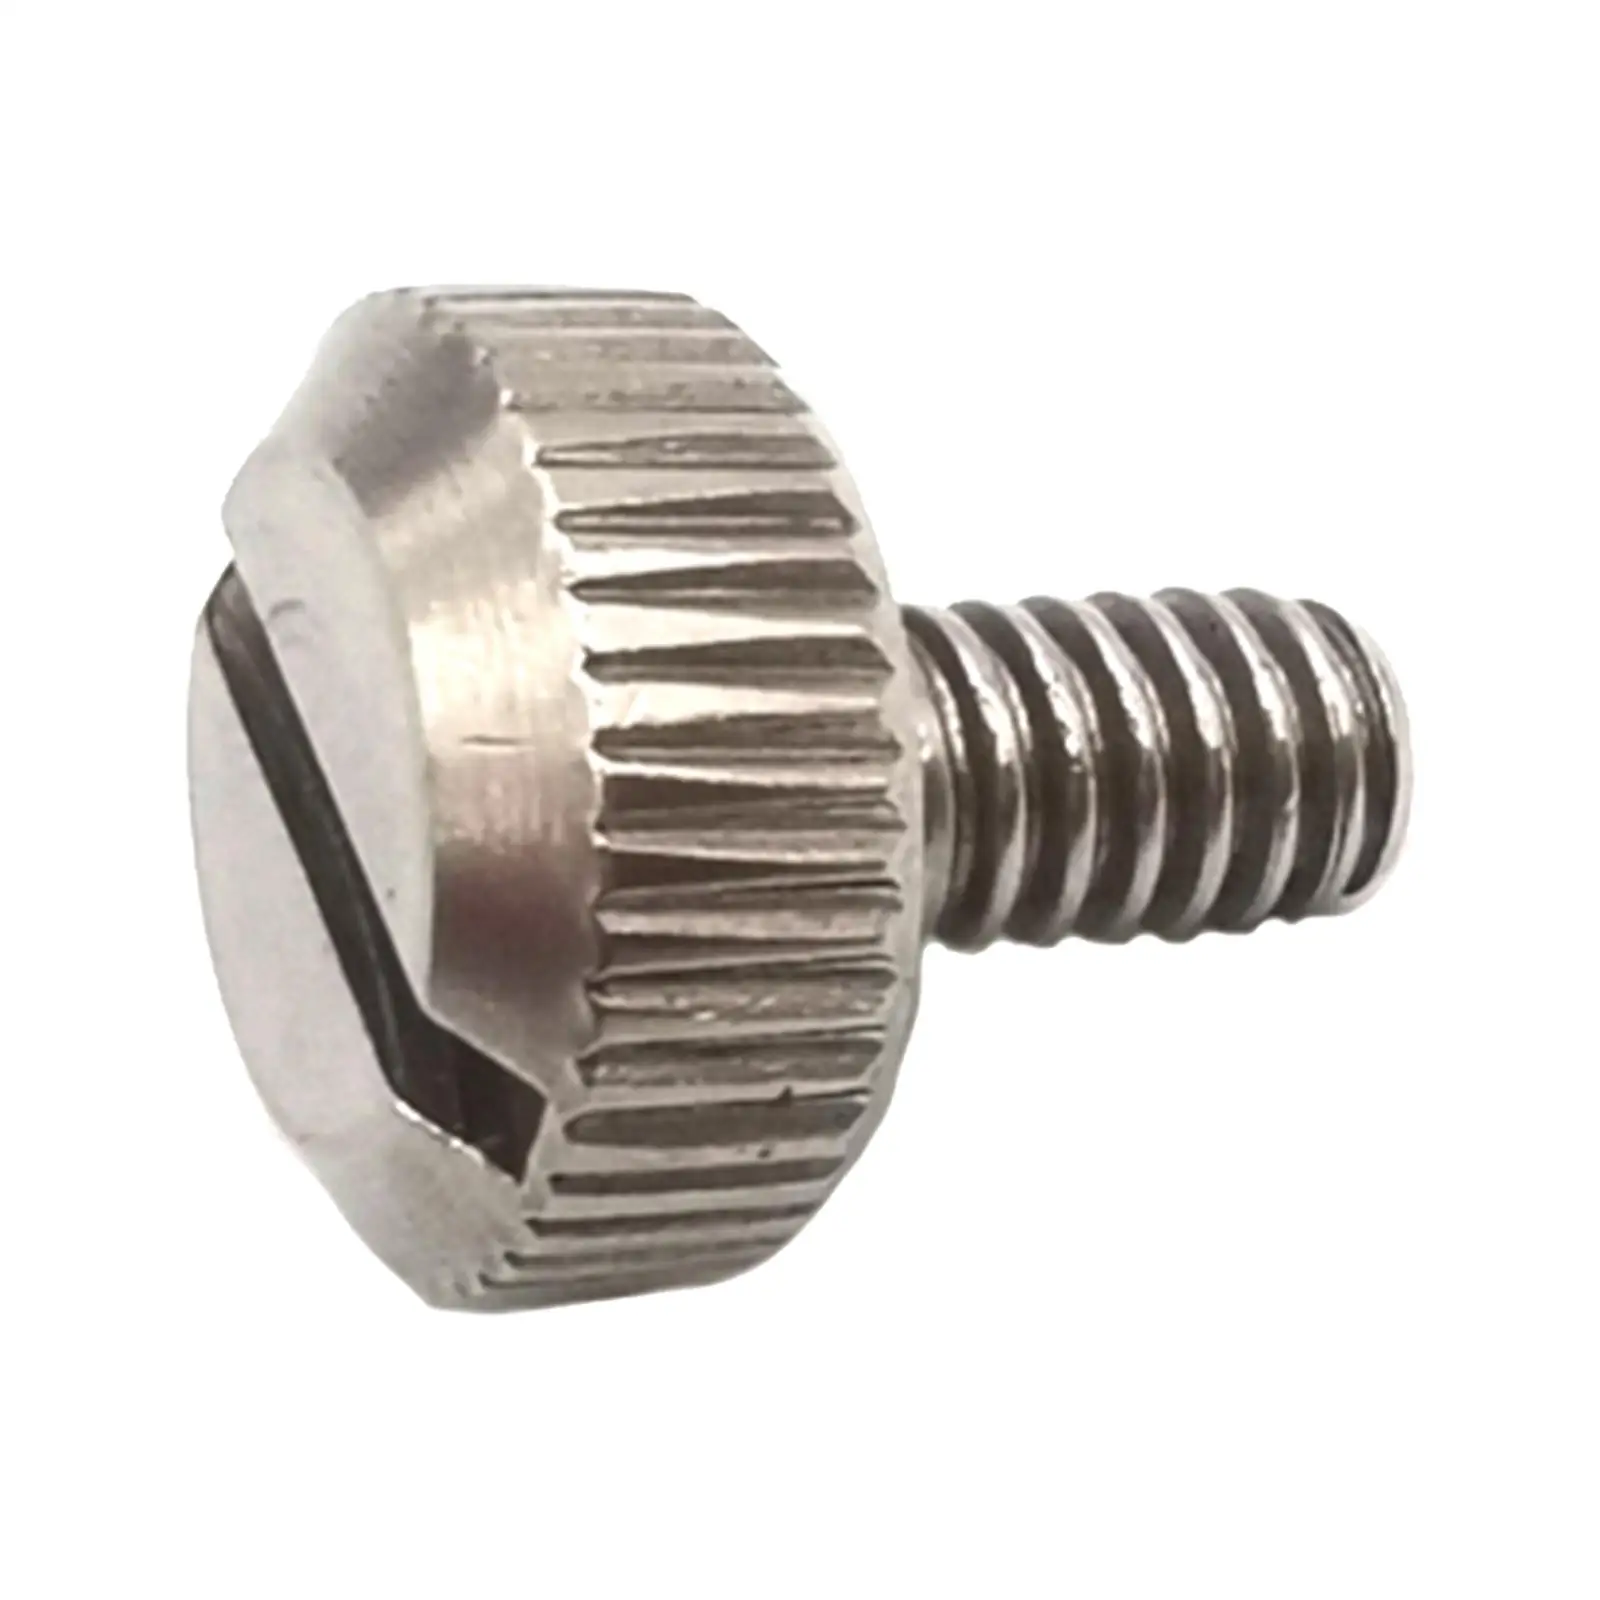 Seat Bolt Mount 6mm Screw for Touring Replacement Part